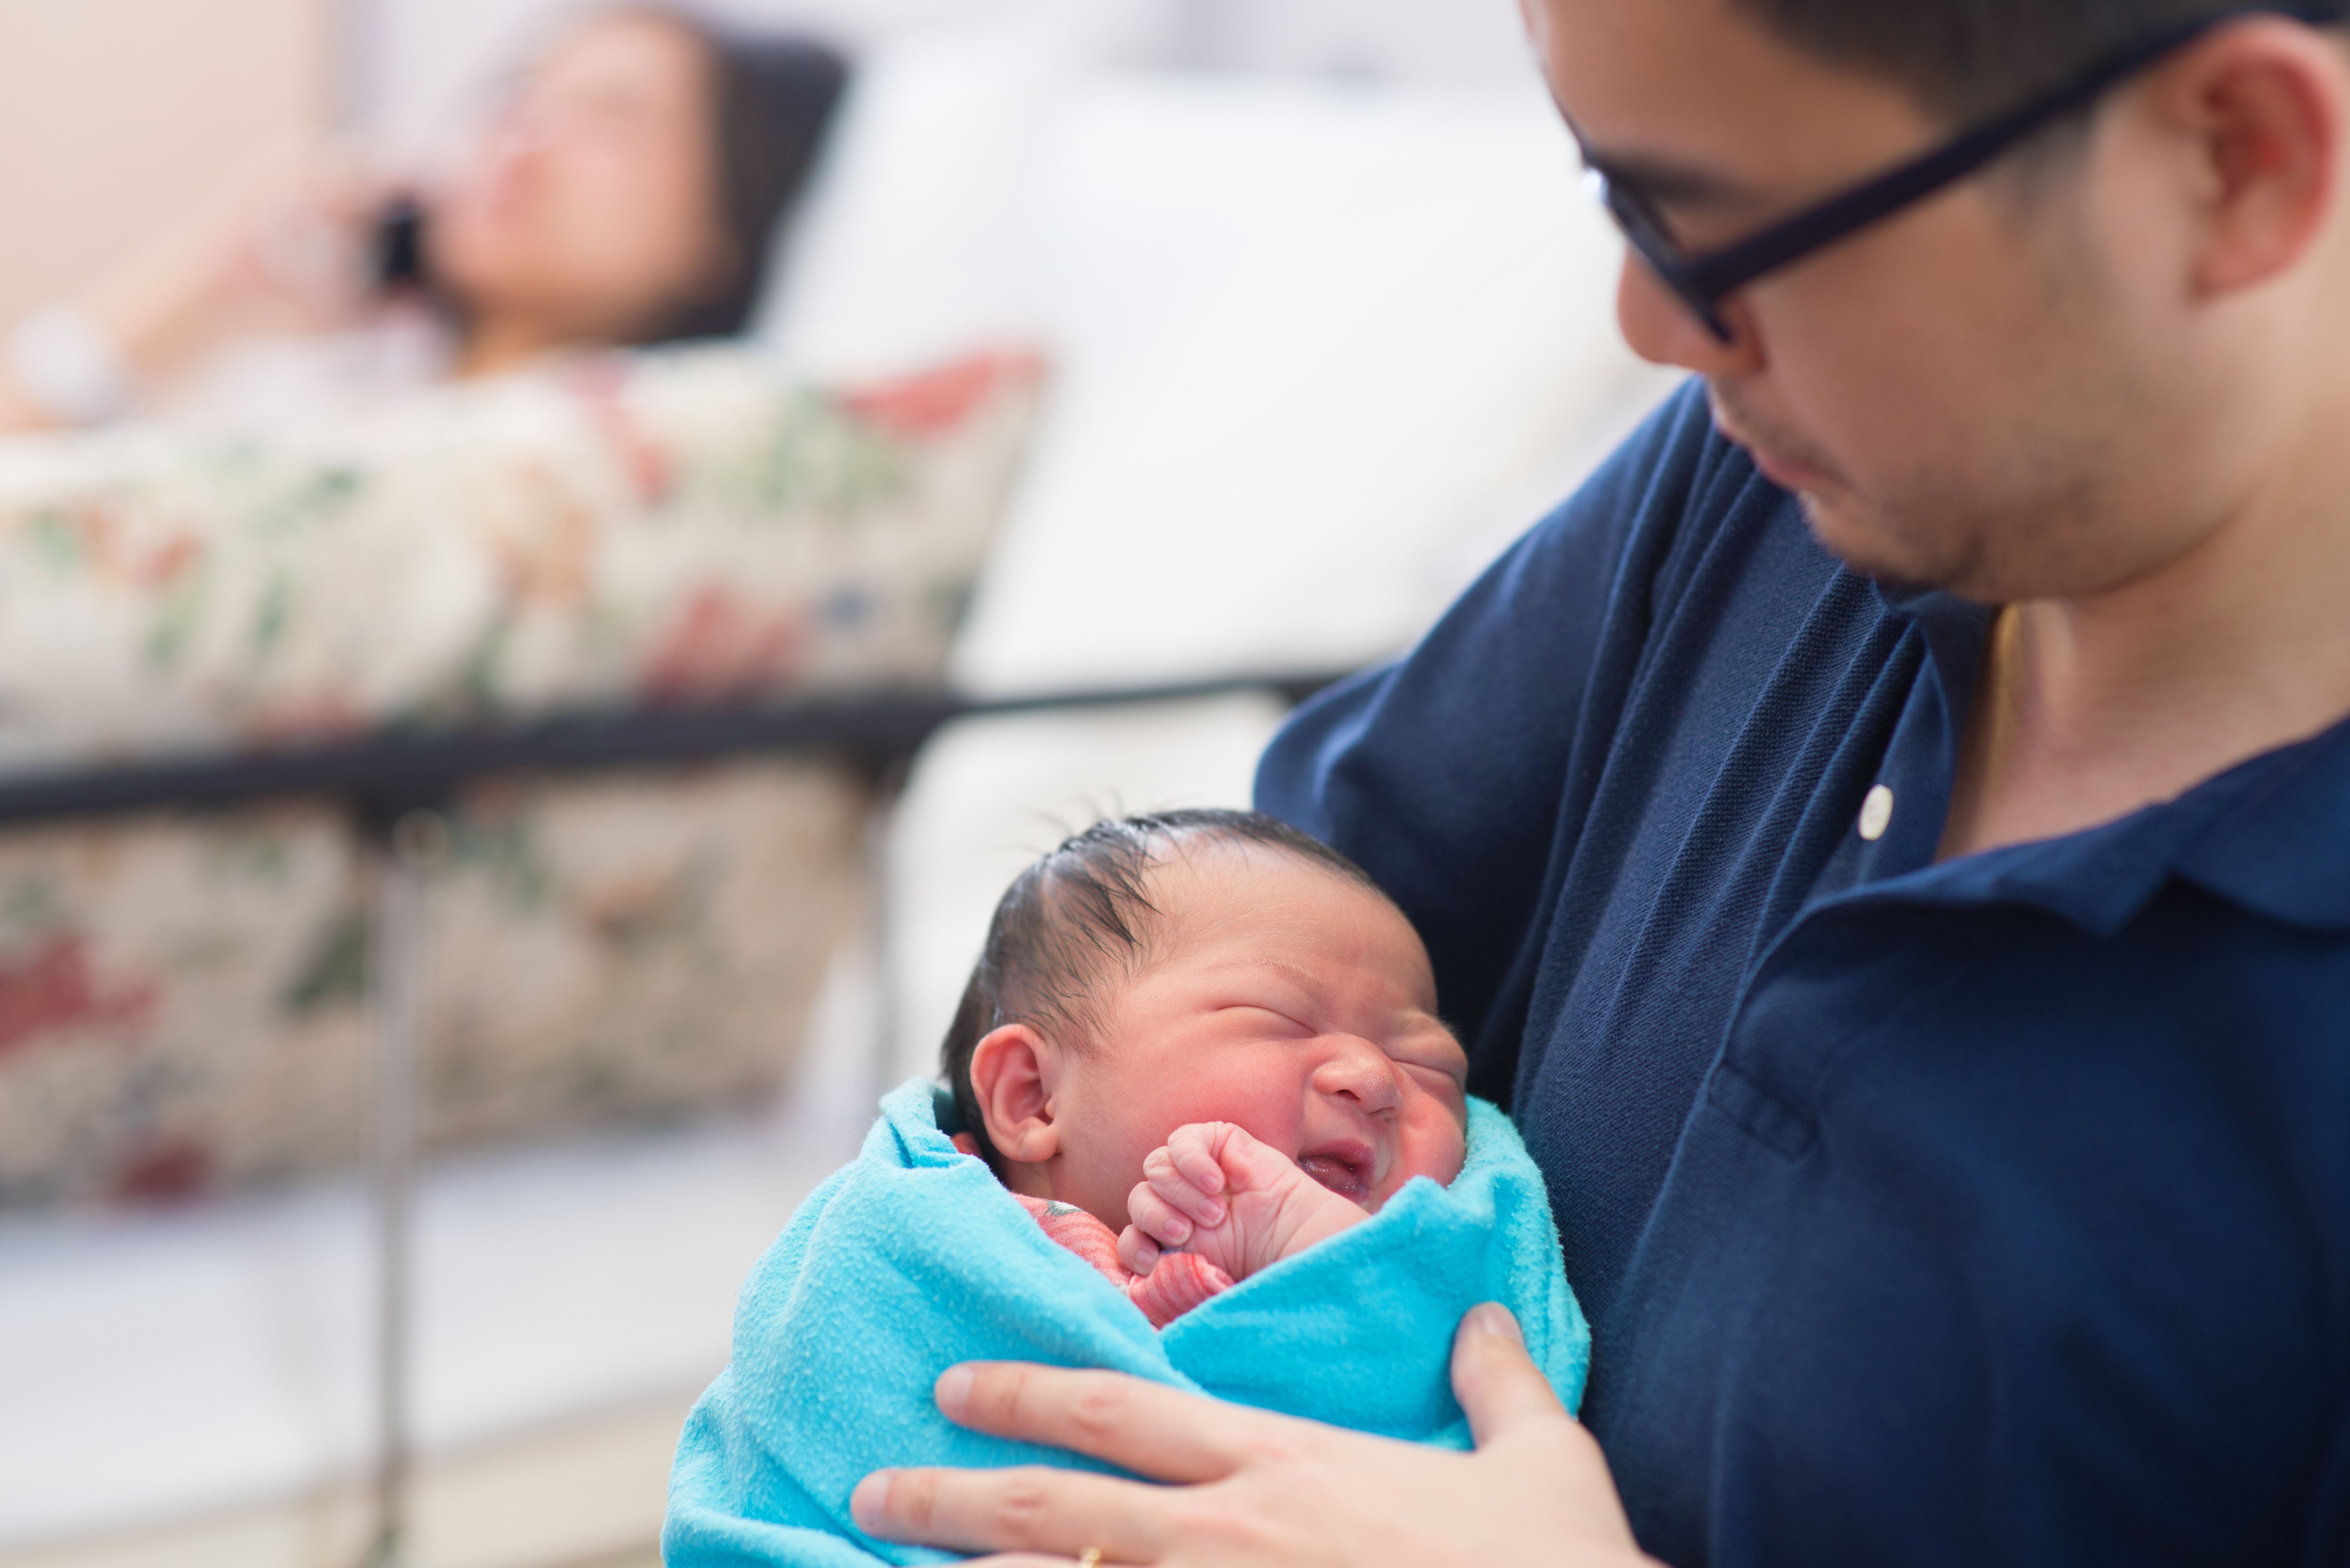 Employers in Hong Kong will have to pay HK$84 million more a year if paternity leave is increased to five days. Photo: Alamy